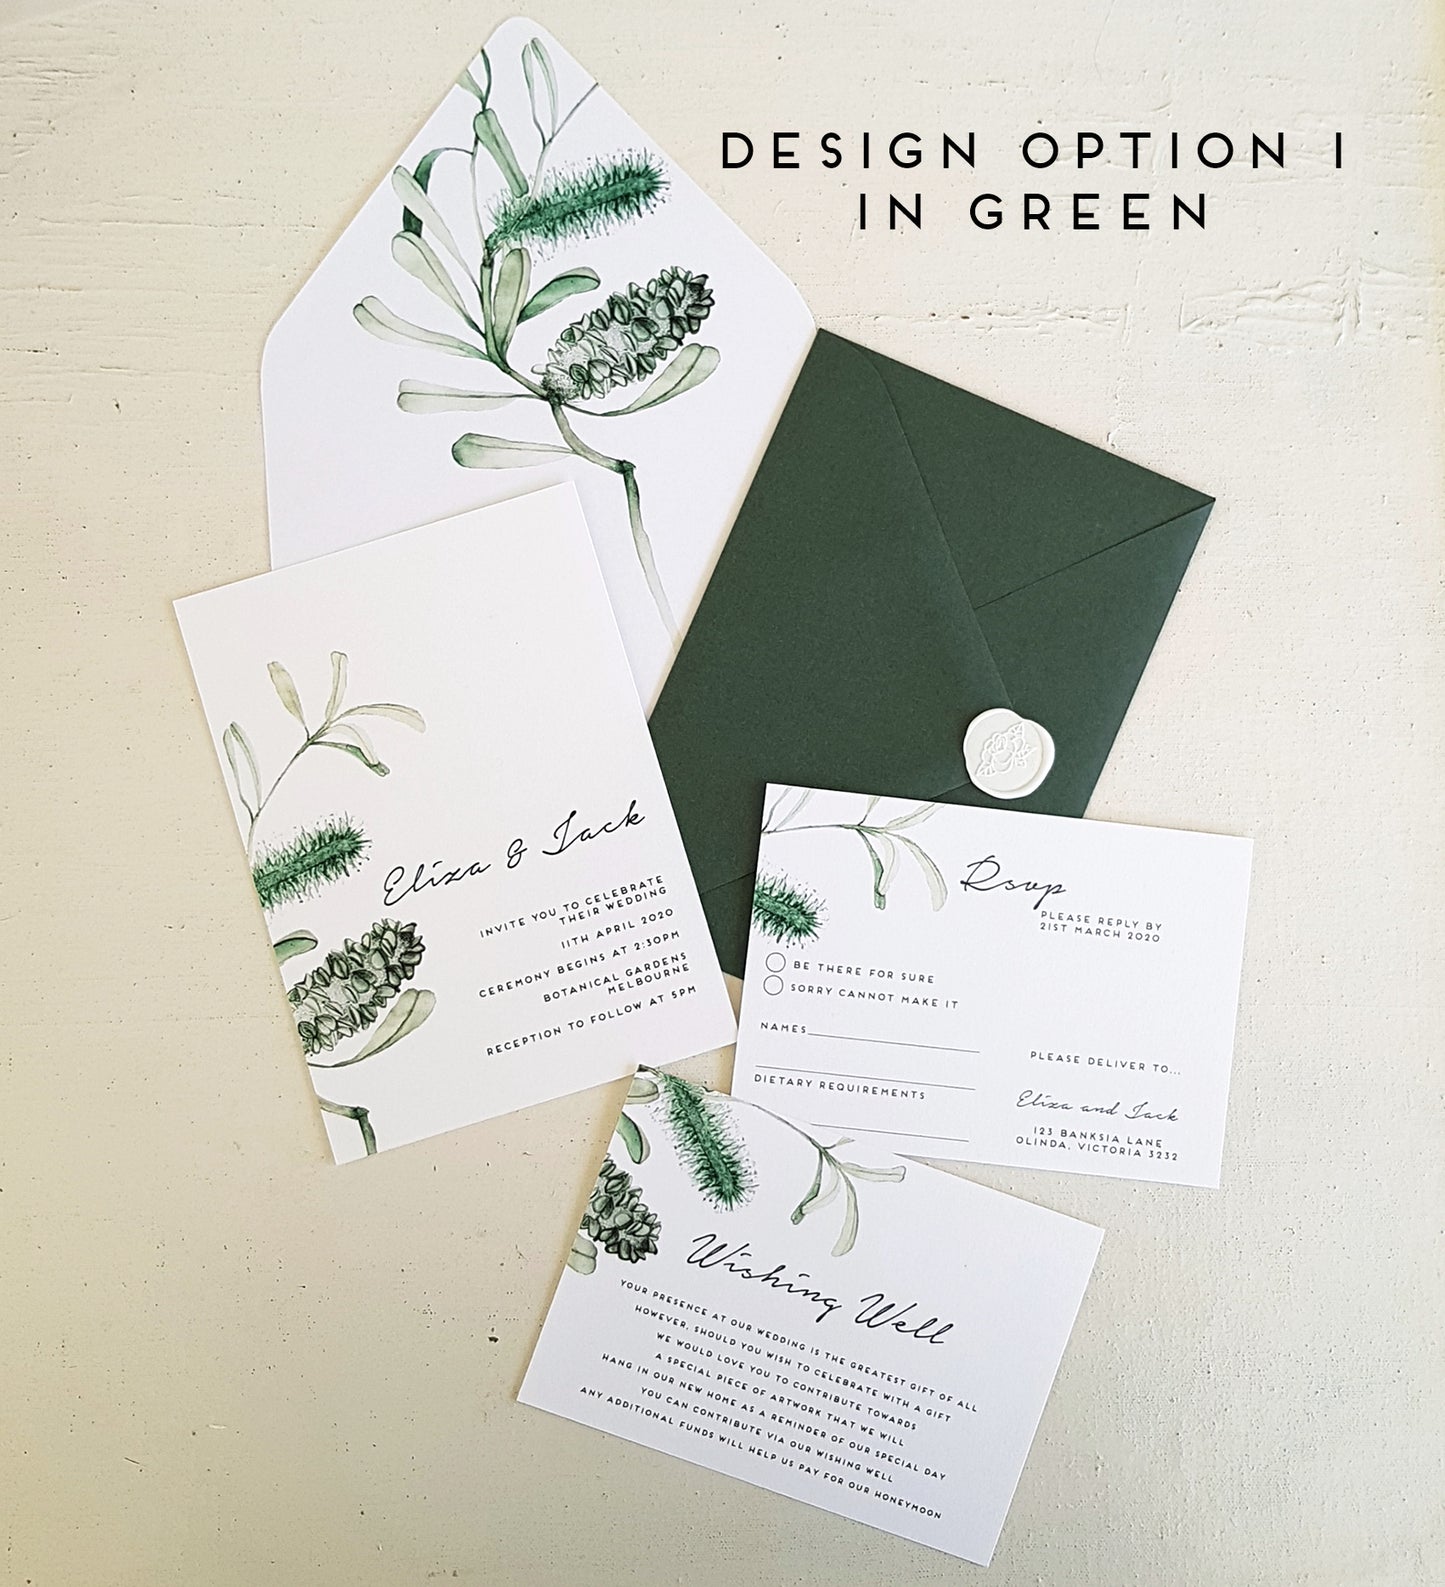 Banksia wedding invite set in black and white or green, featuring invite, rsvp card, wishing well card, envelope, wax seal and envelope liner